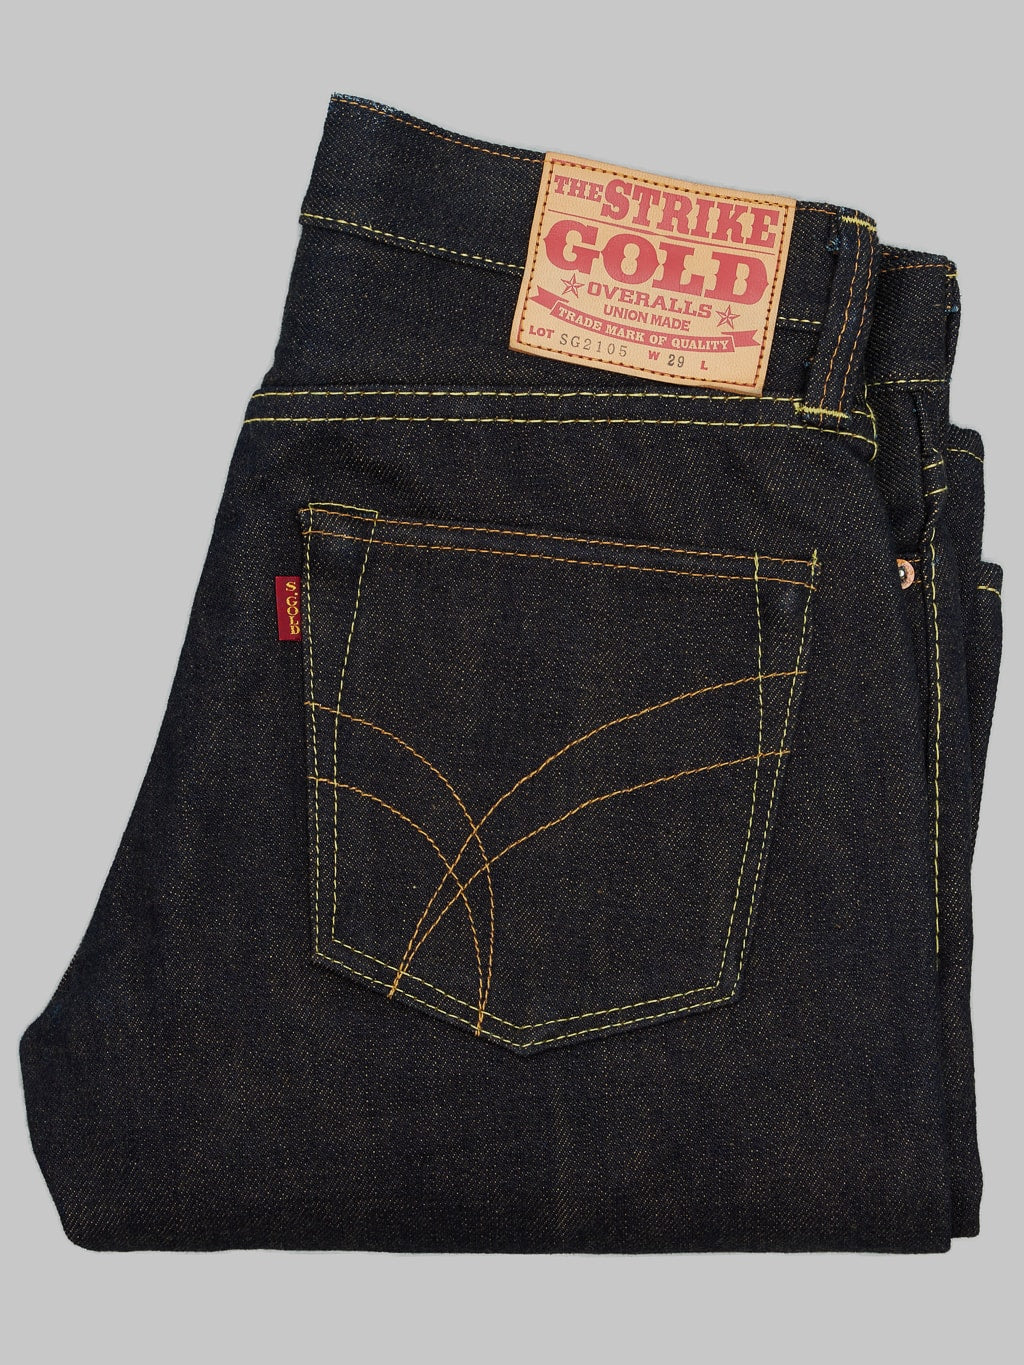 The Strike Gold 2105 Brown Weft Slim Straight Jeans